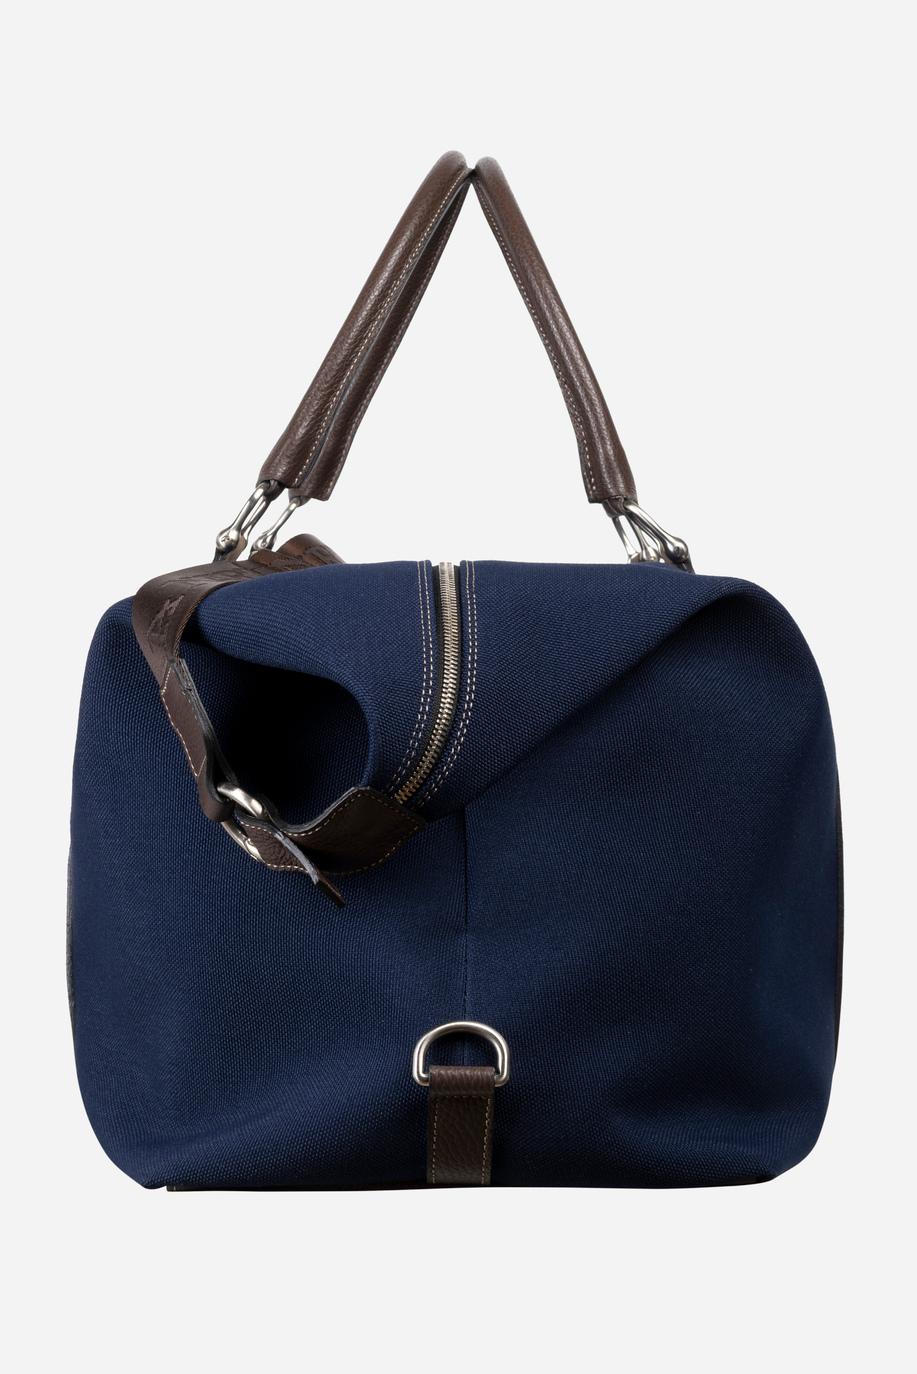 Cotton duffle bag with leather inserts - test | La Martina - Official Online Shop